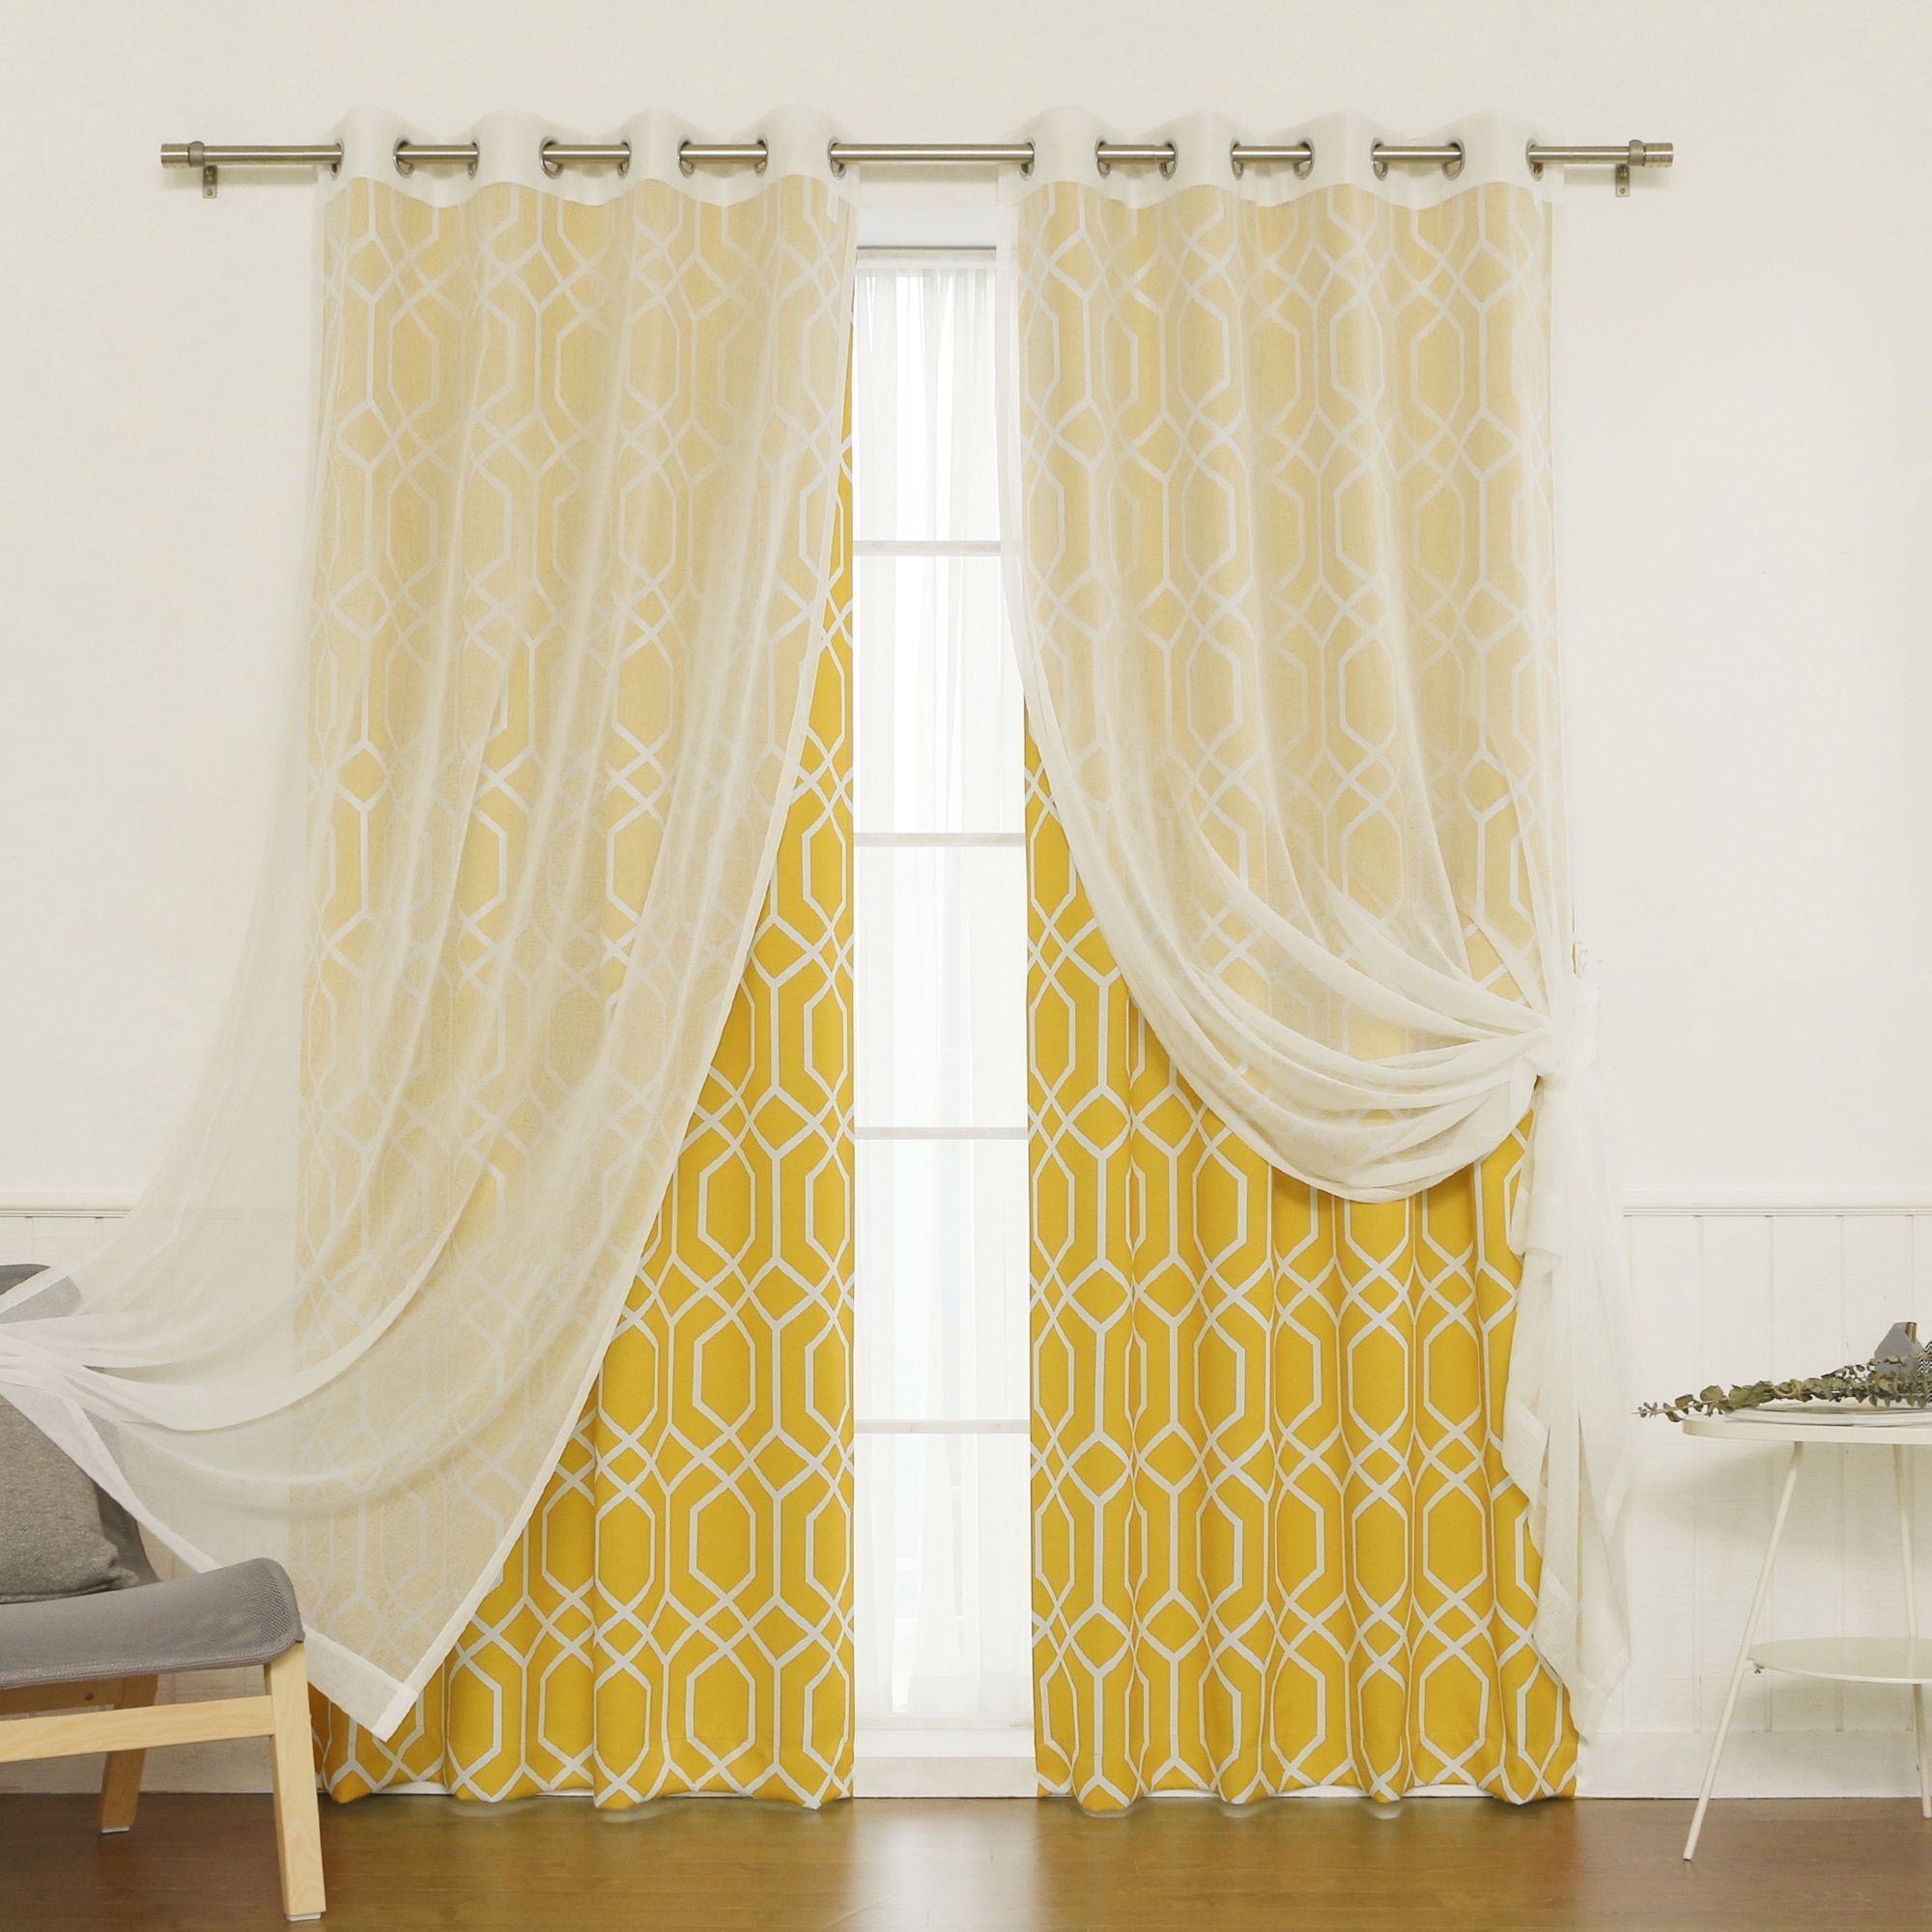 Aurora Home Mix And Match Curtains Muji Sheer Geometric Intended For Luxury Collection Monte Carlo Sheer Curtain Panel Pairs (View 13 of 20)